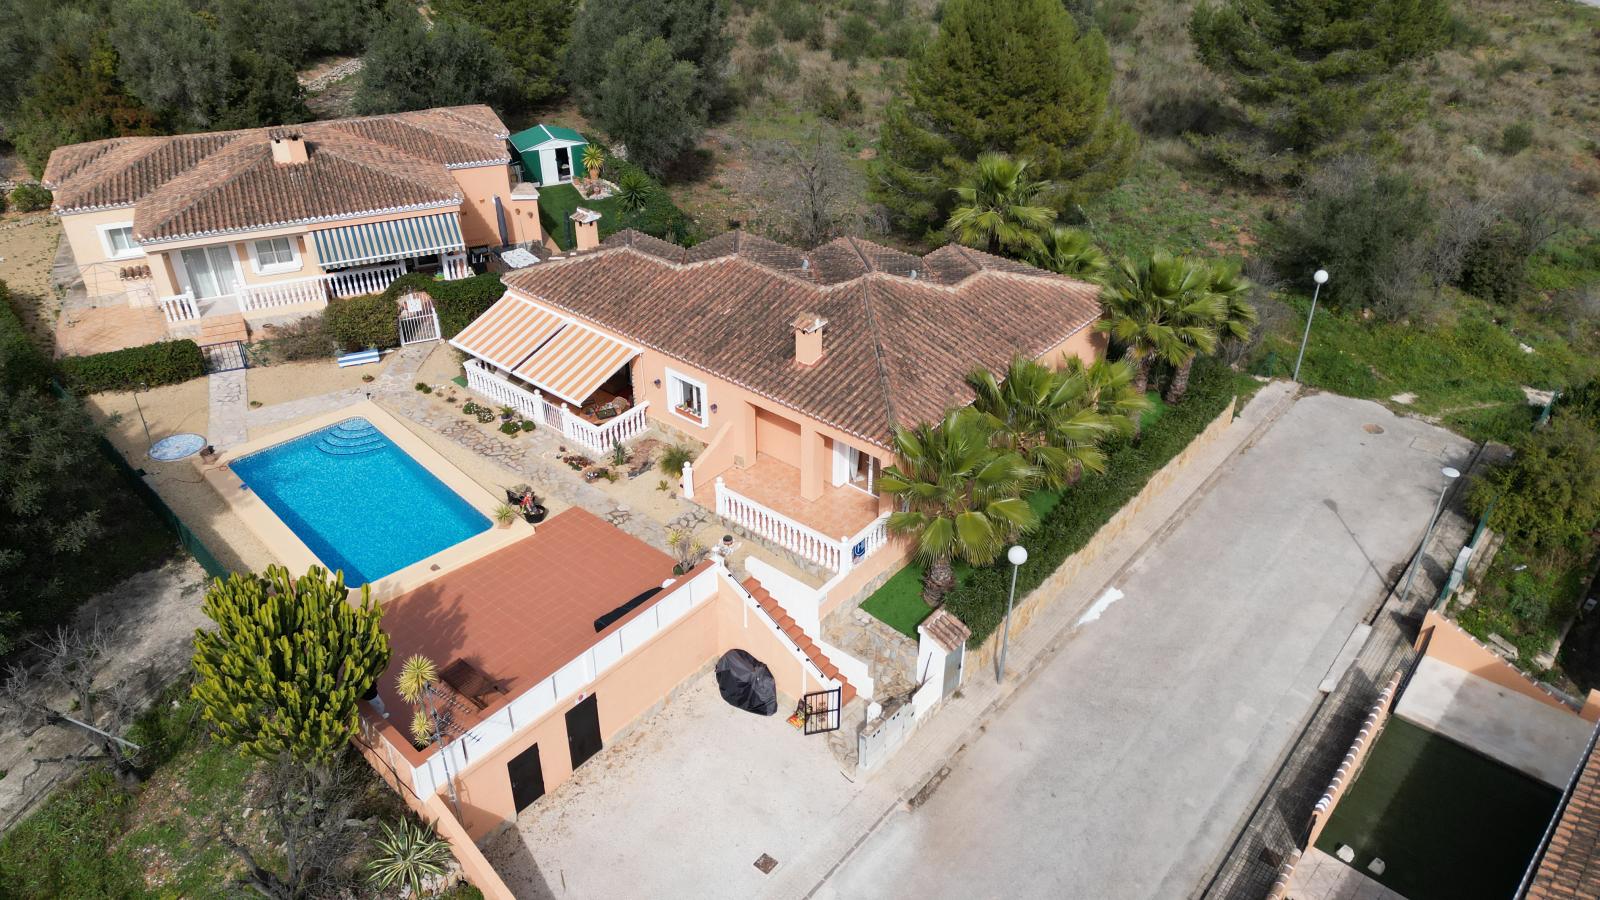 2 bedroom semi-detached house with communal pool in Alcalali.